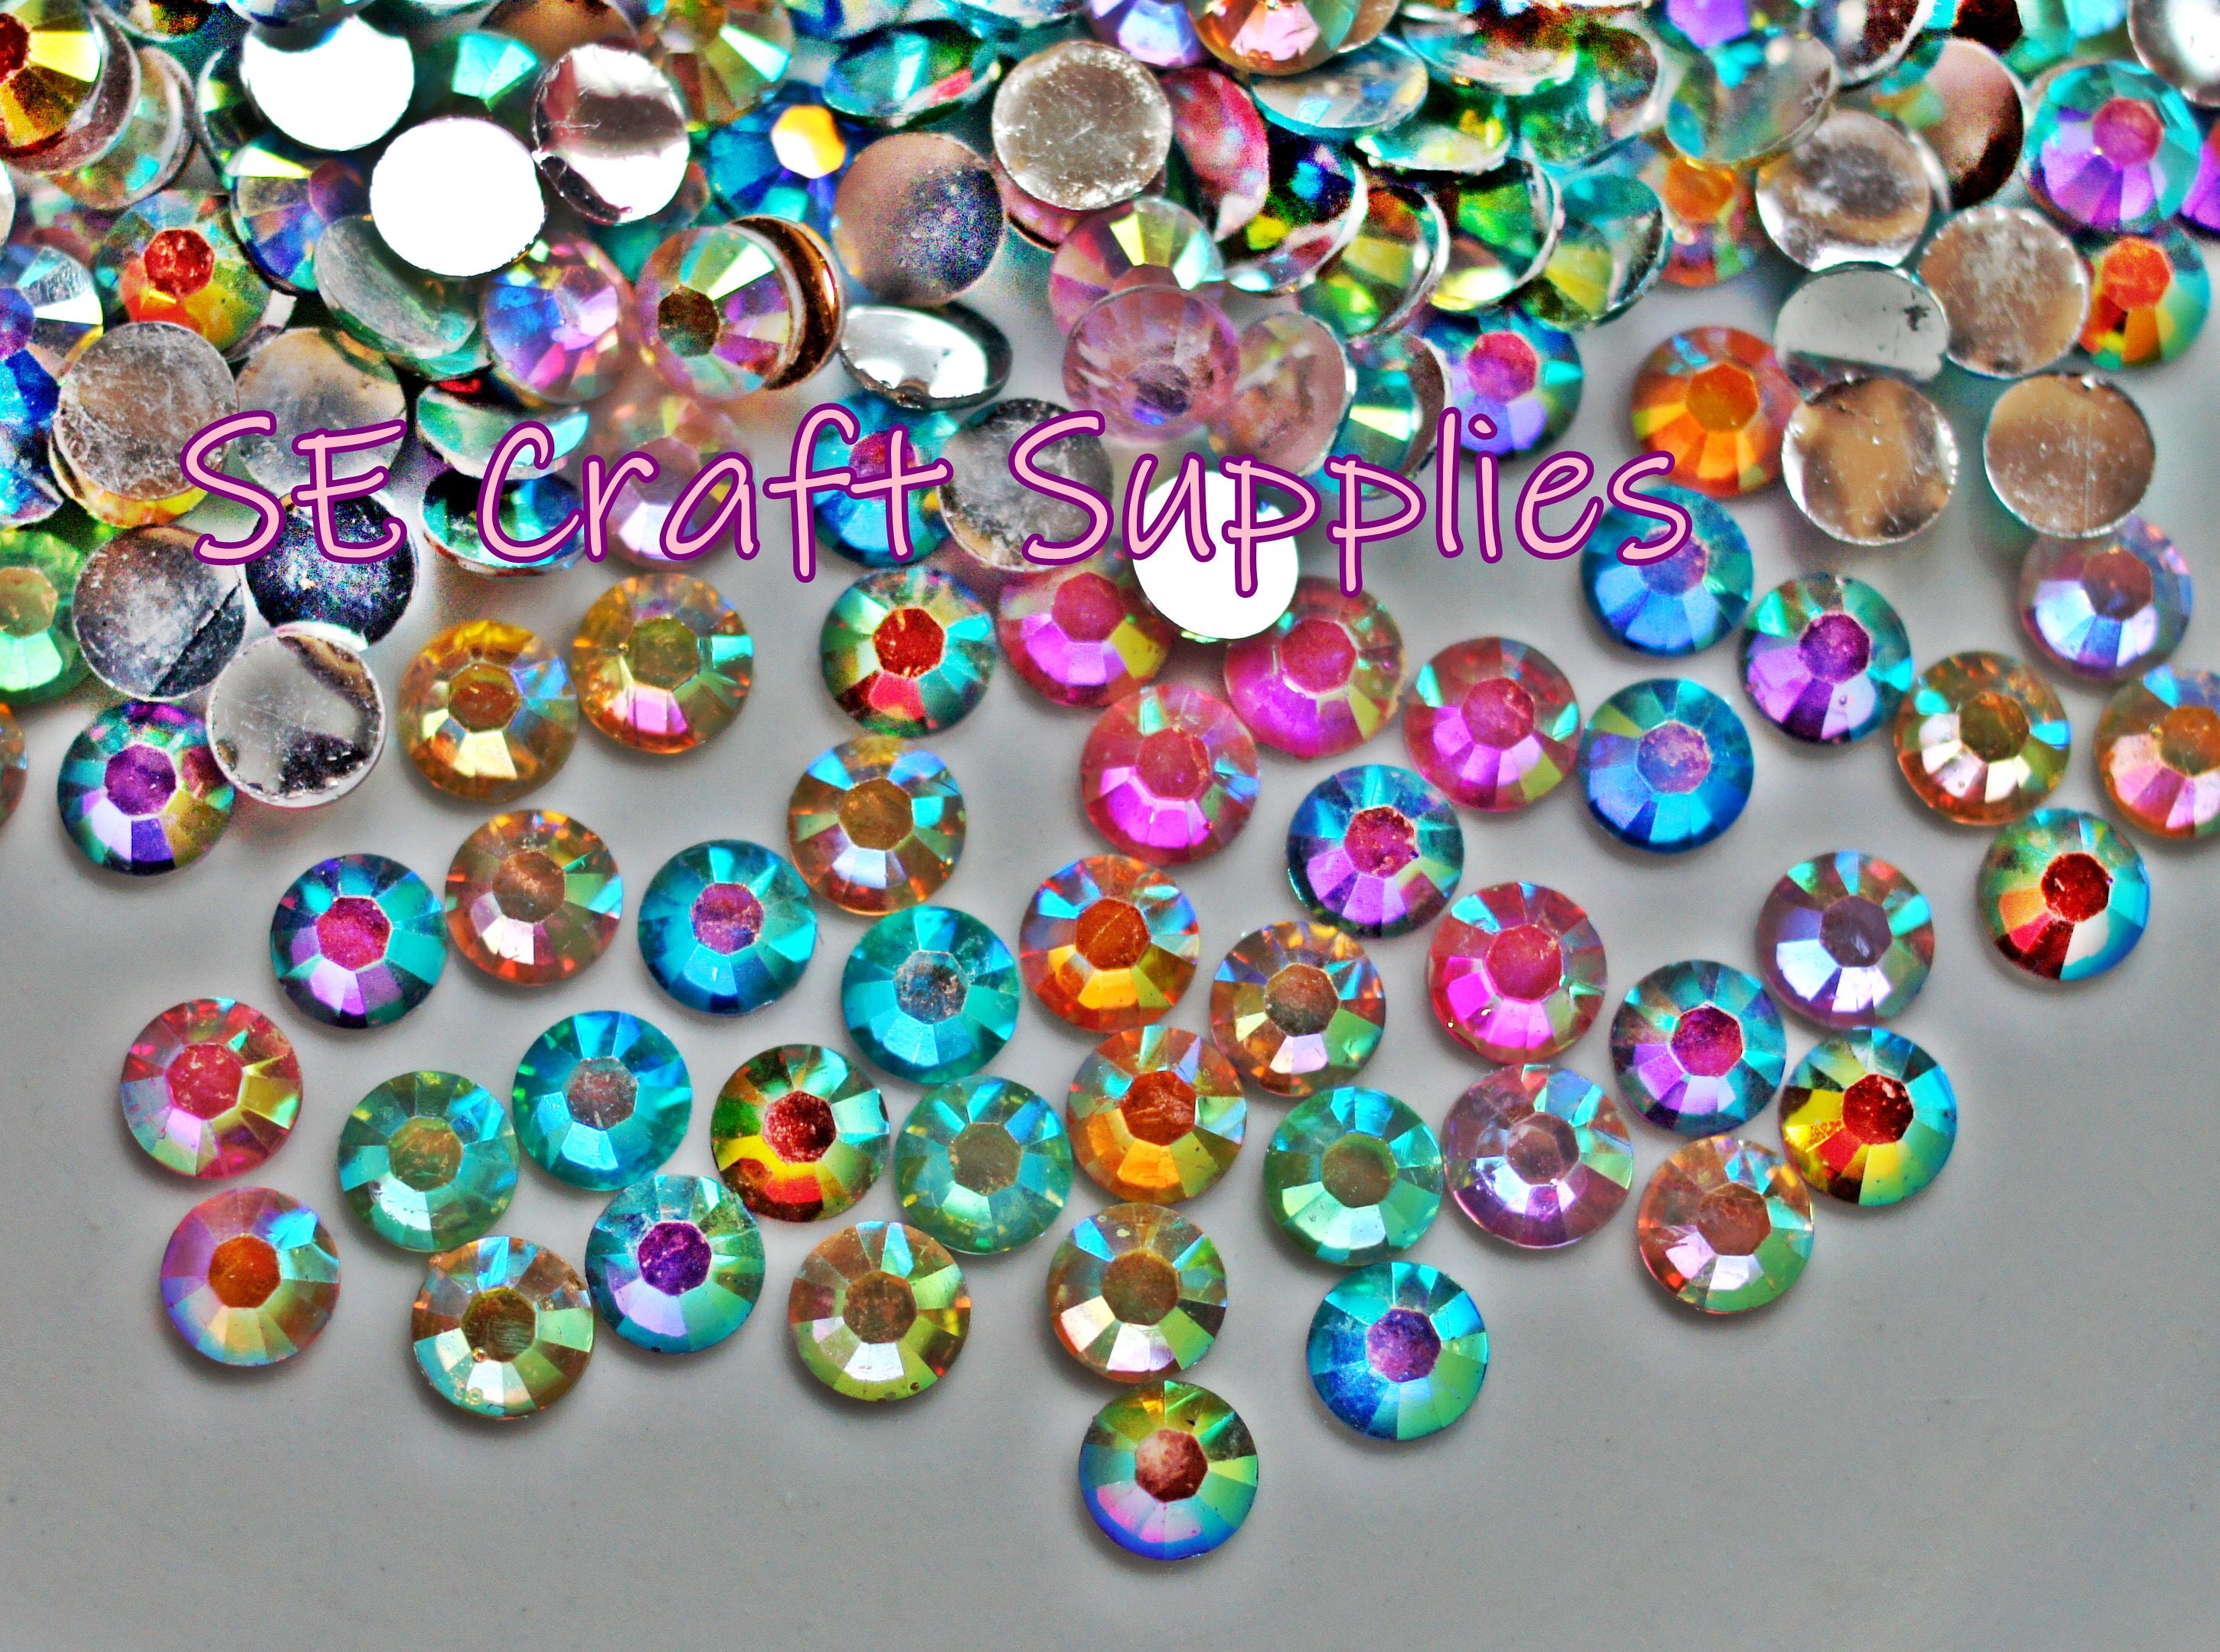 200pcs Black Of SS16 Crystal Rhinestones Perfect For Crafts, Nails,  Clothes, Shoes, Bags & DIY Art!